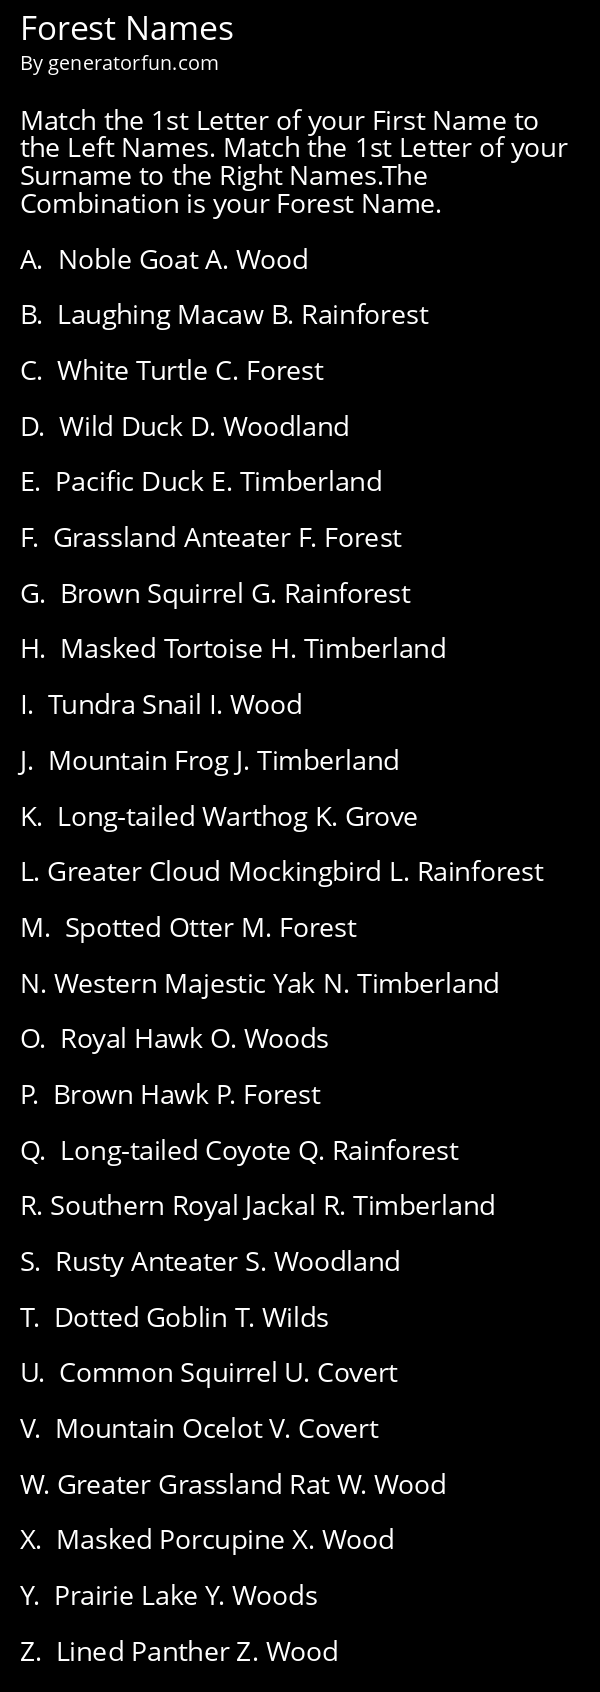 Forest Names